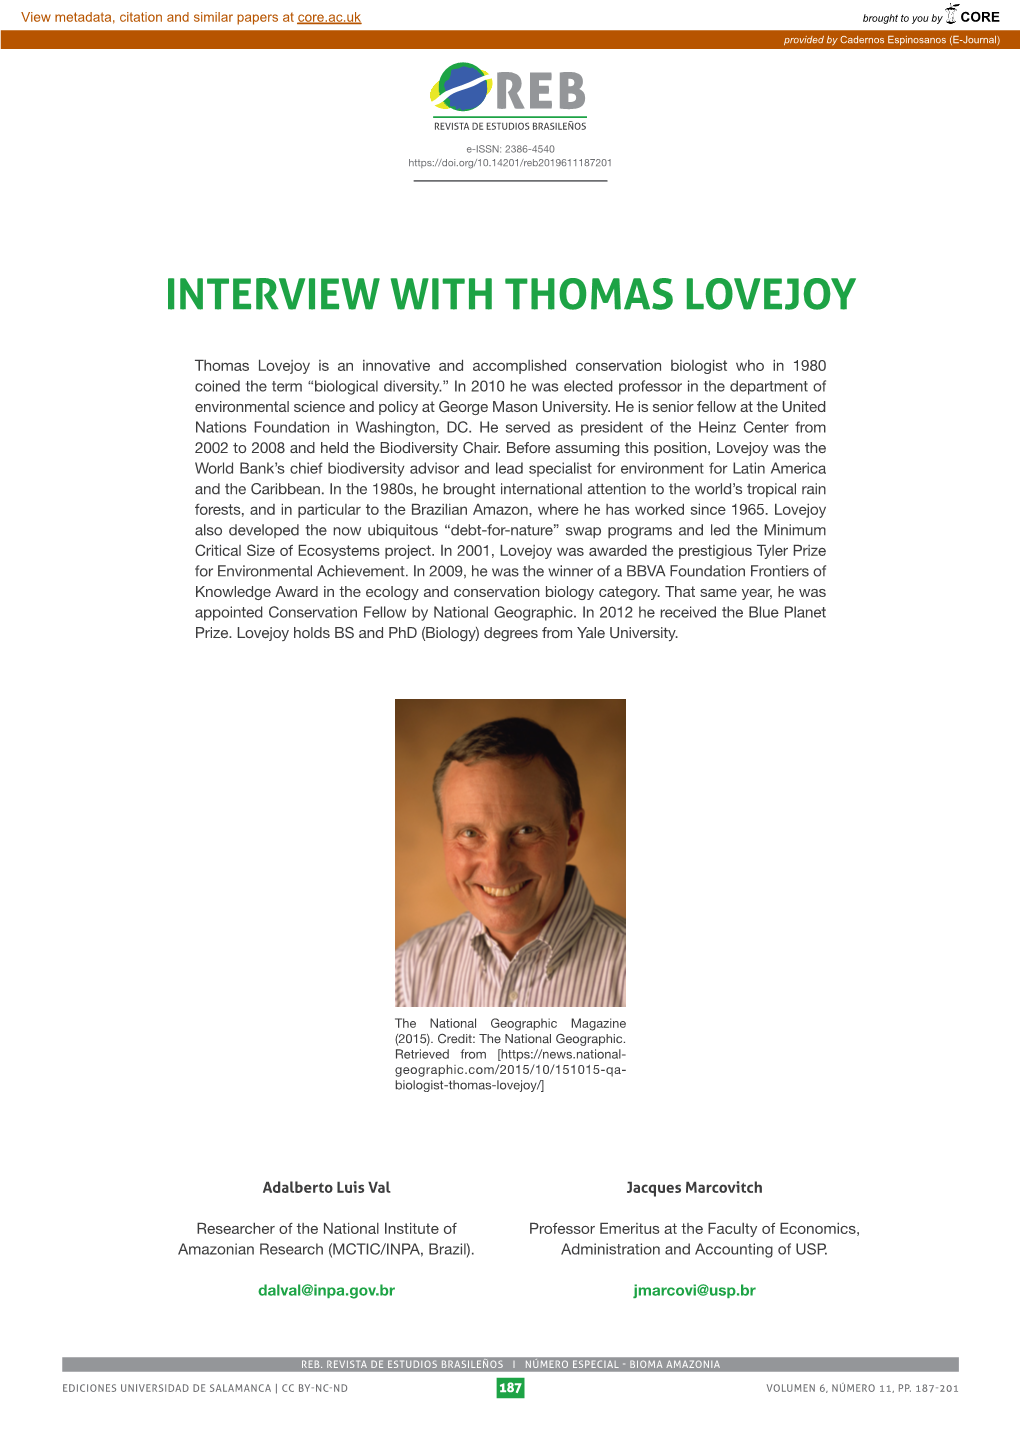 Interview with Thomas Lovejoy